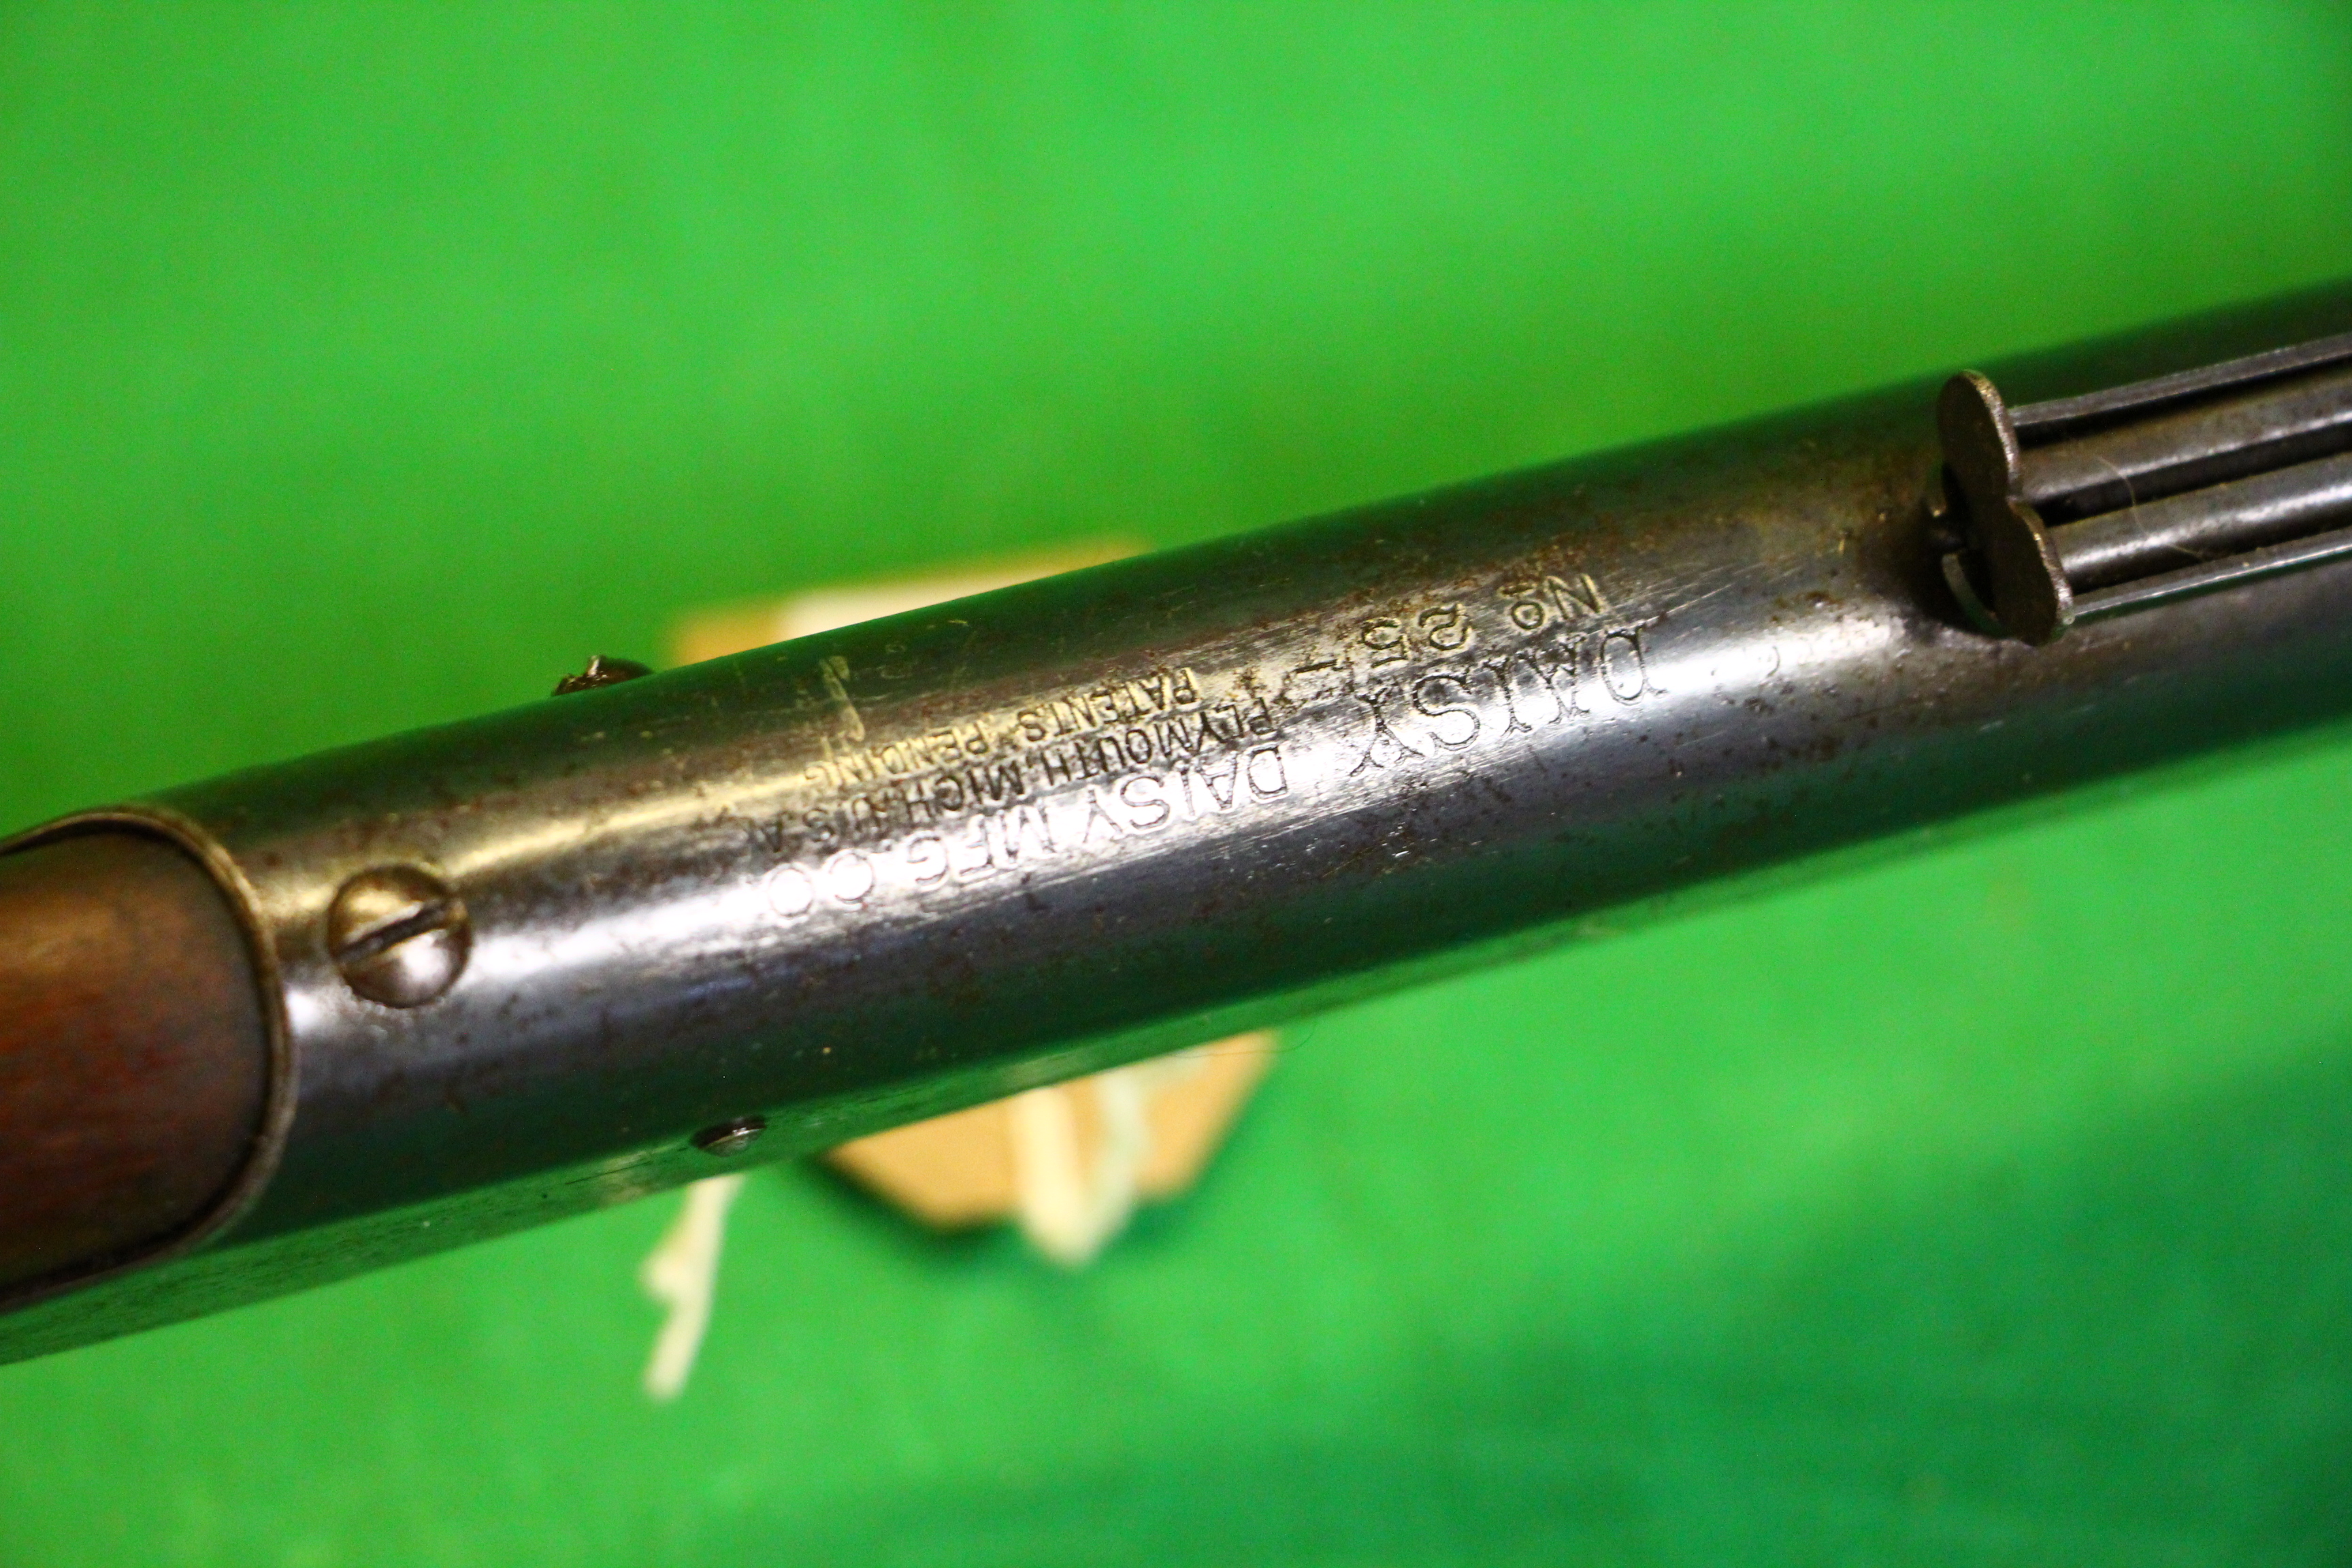 A DAISY MODEL 25 PUMP ACTION AIR GUN - (ALL GUNS TO BE INSPECTED AND SERVICED BY QUALIFIED GUNSMITH - Image 8 of 8